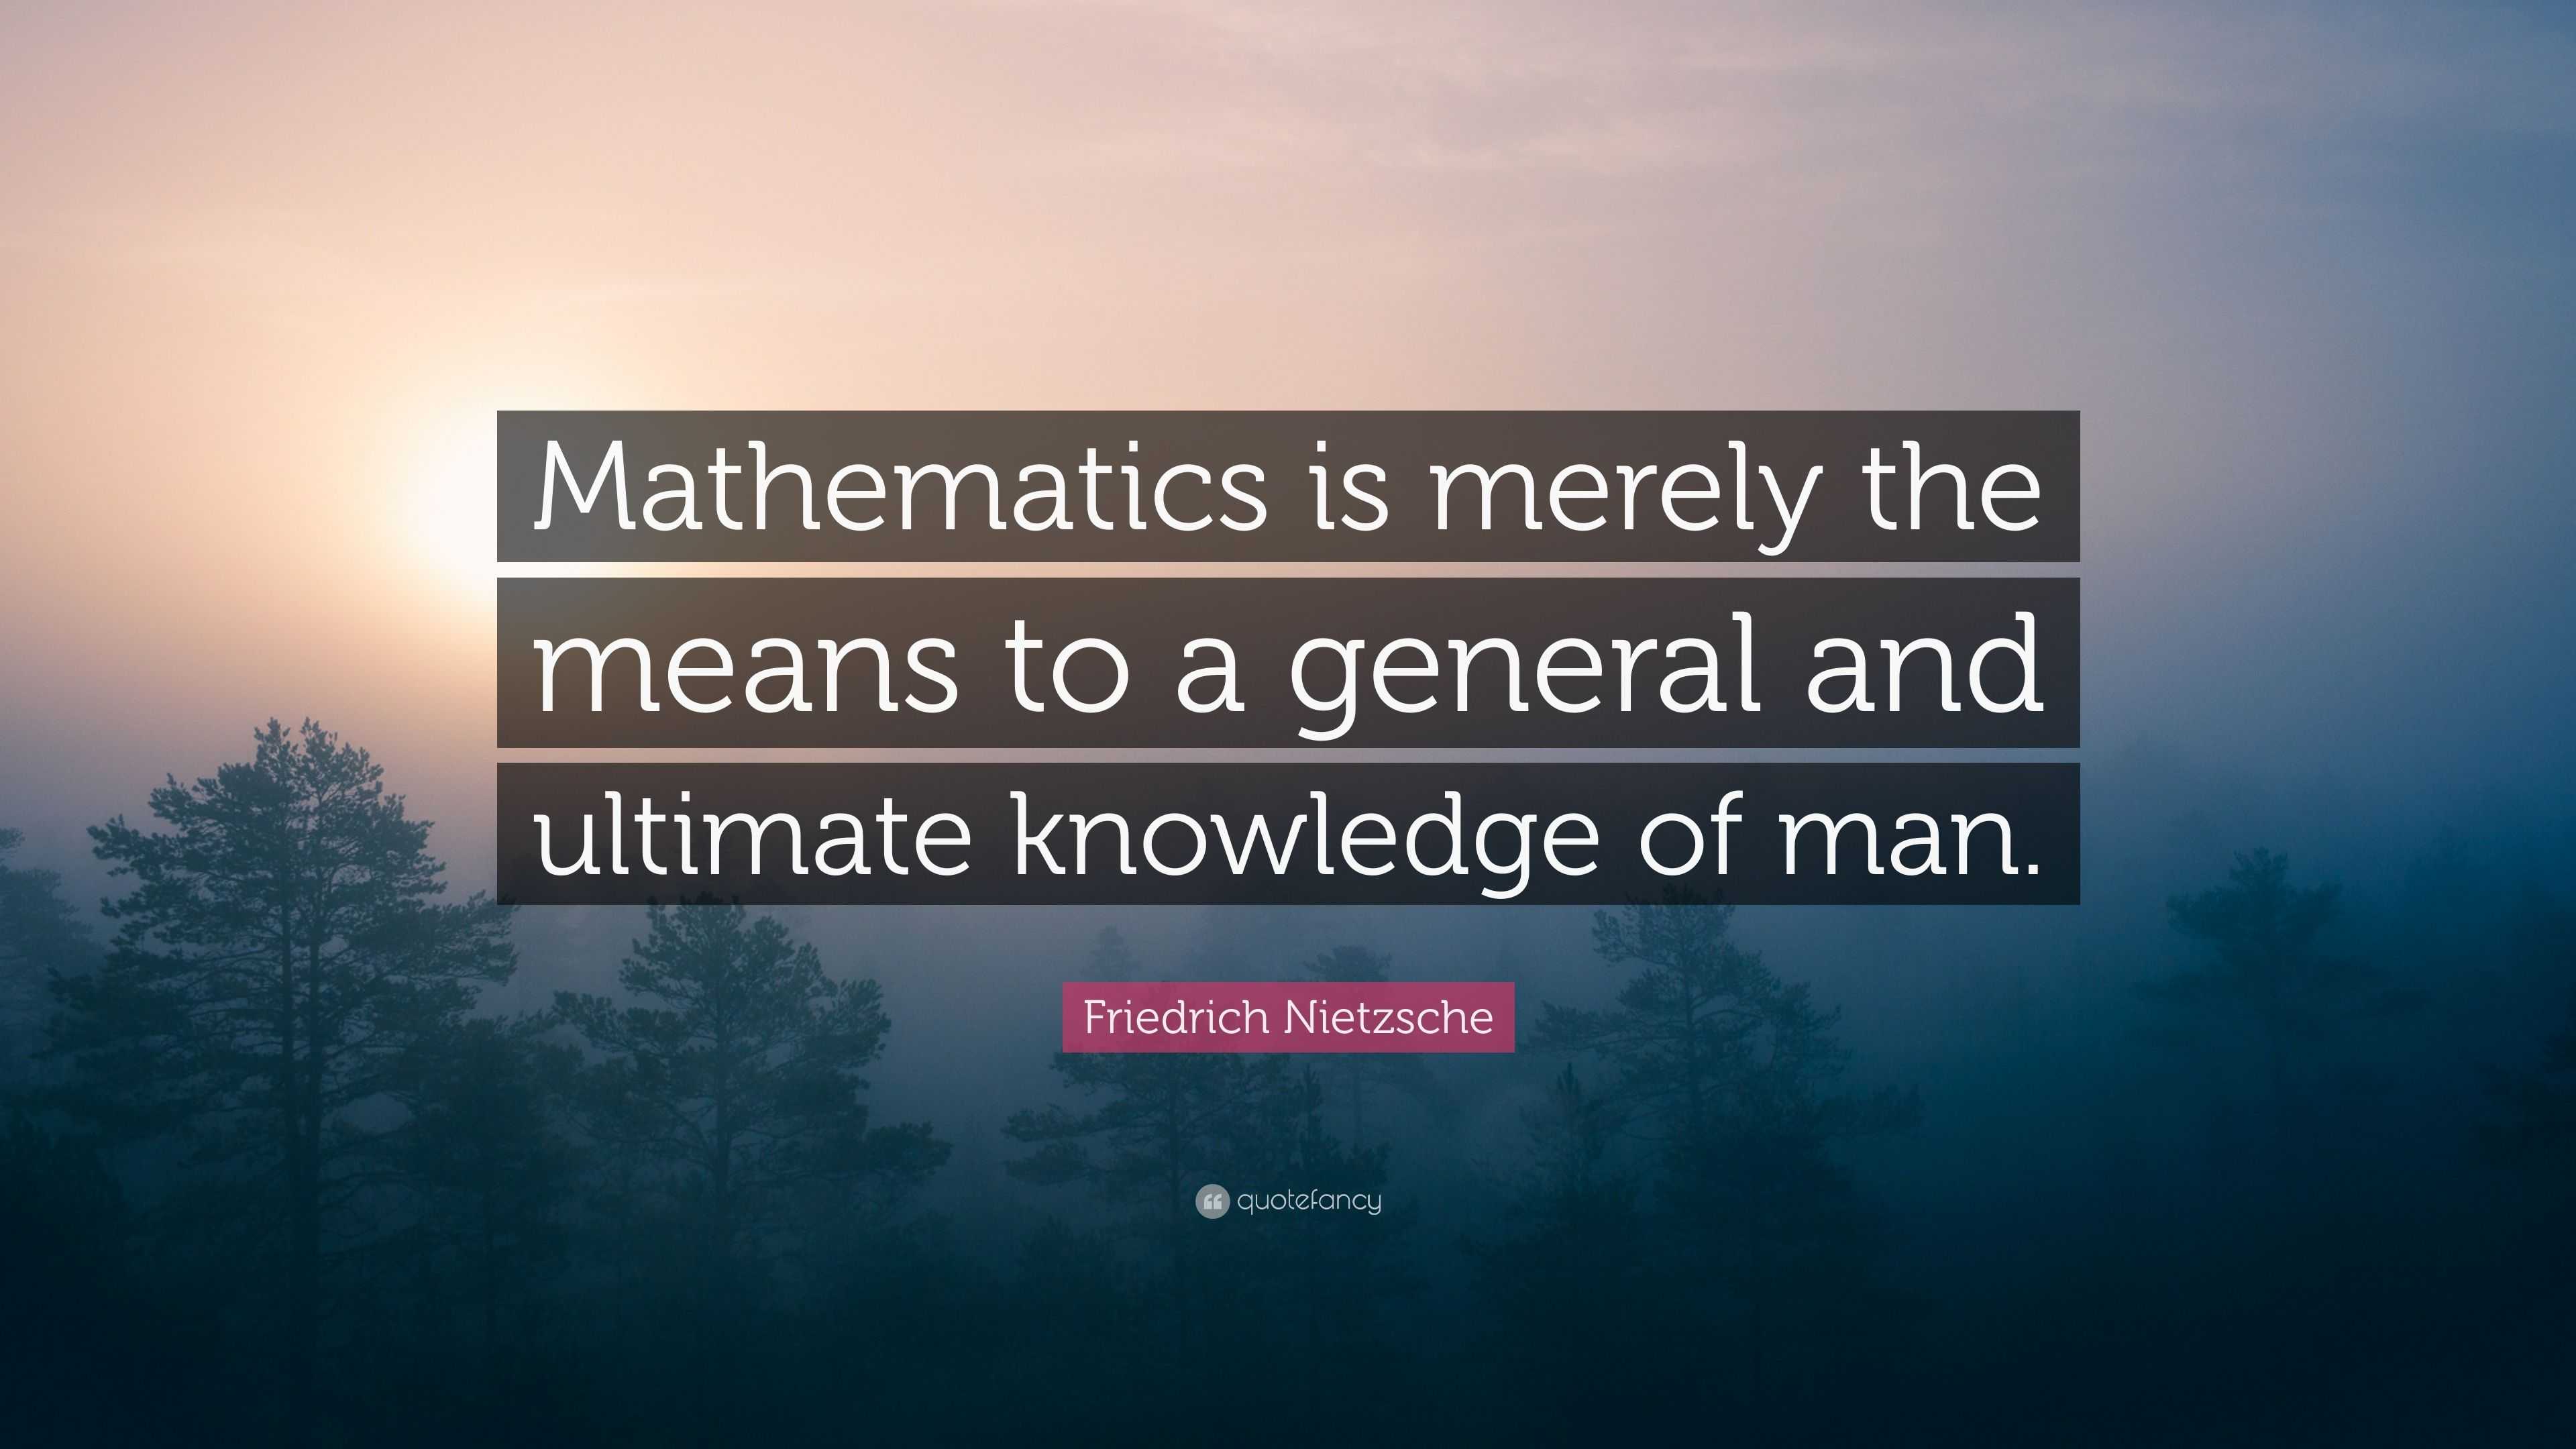 Mathematics is merely the means to a general and ultimate